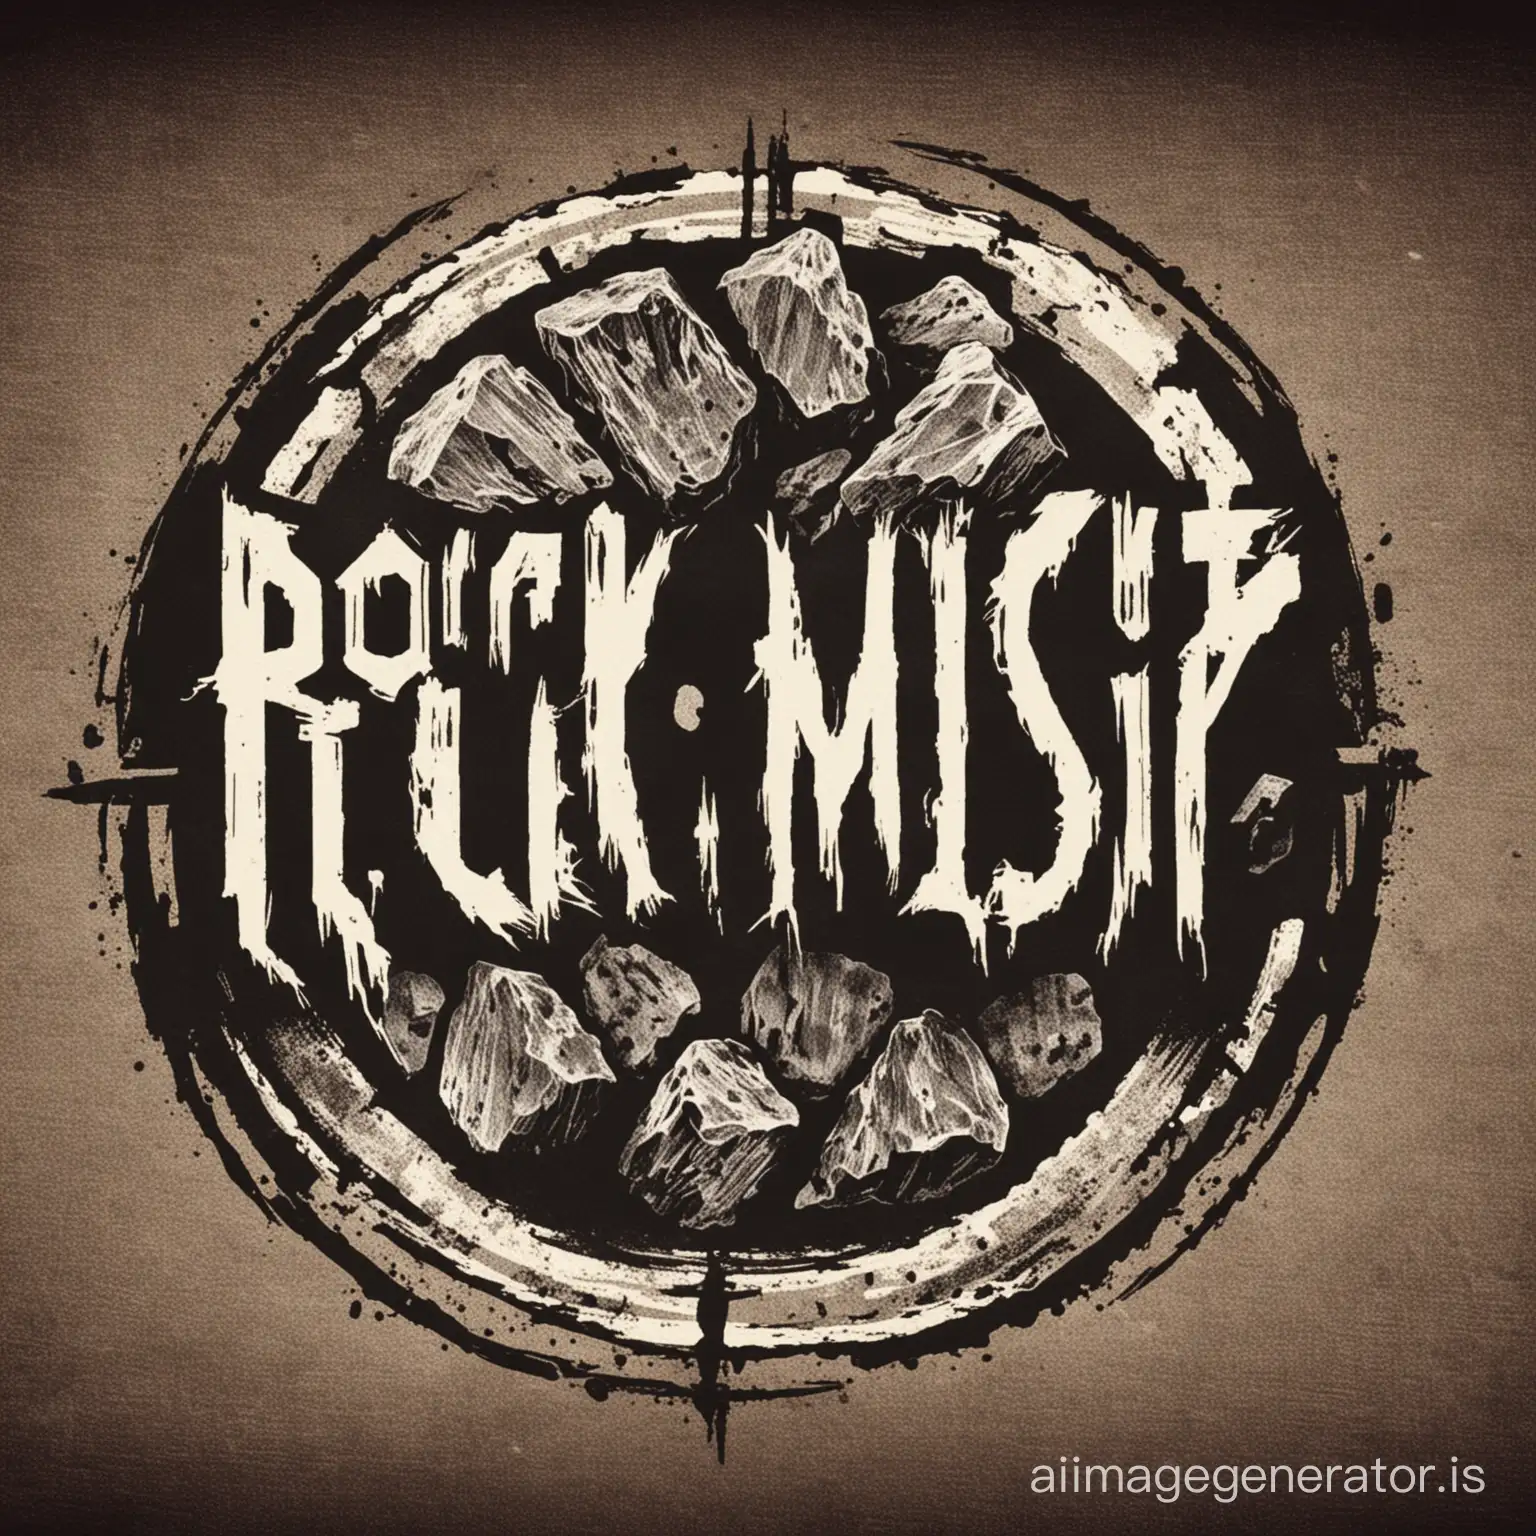 image for a rock music podcast